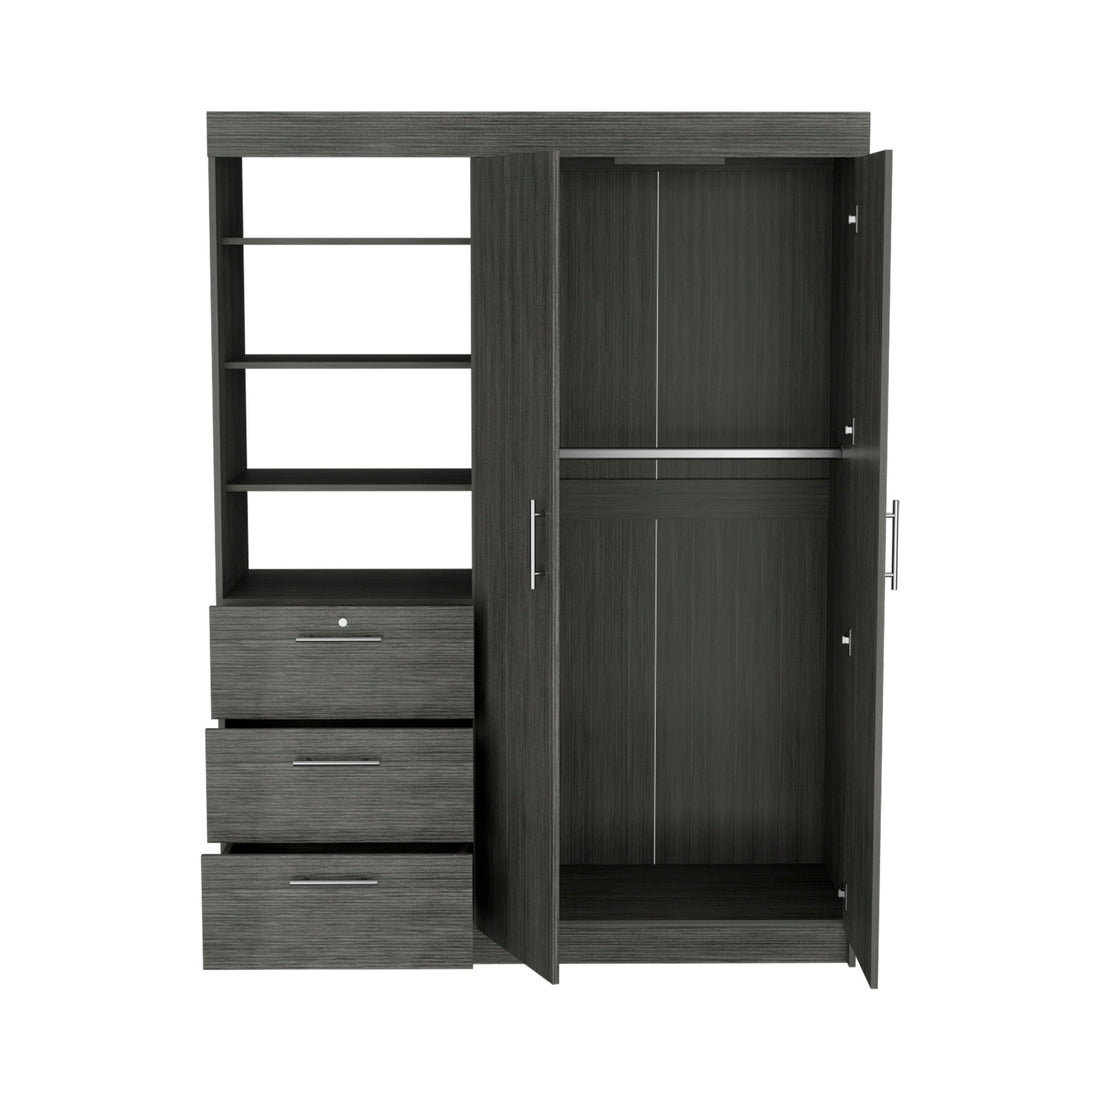 3 Tier Shelf And Drawers Armoire With Metal